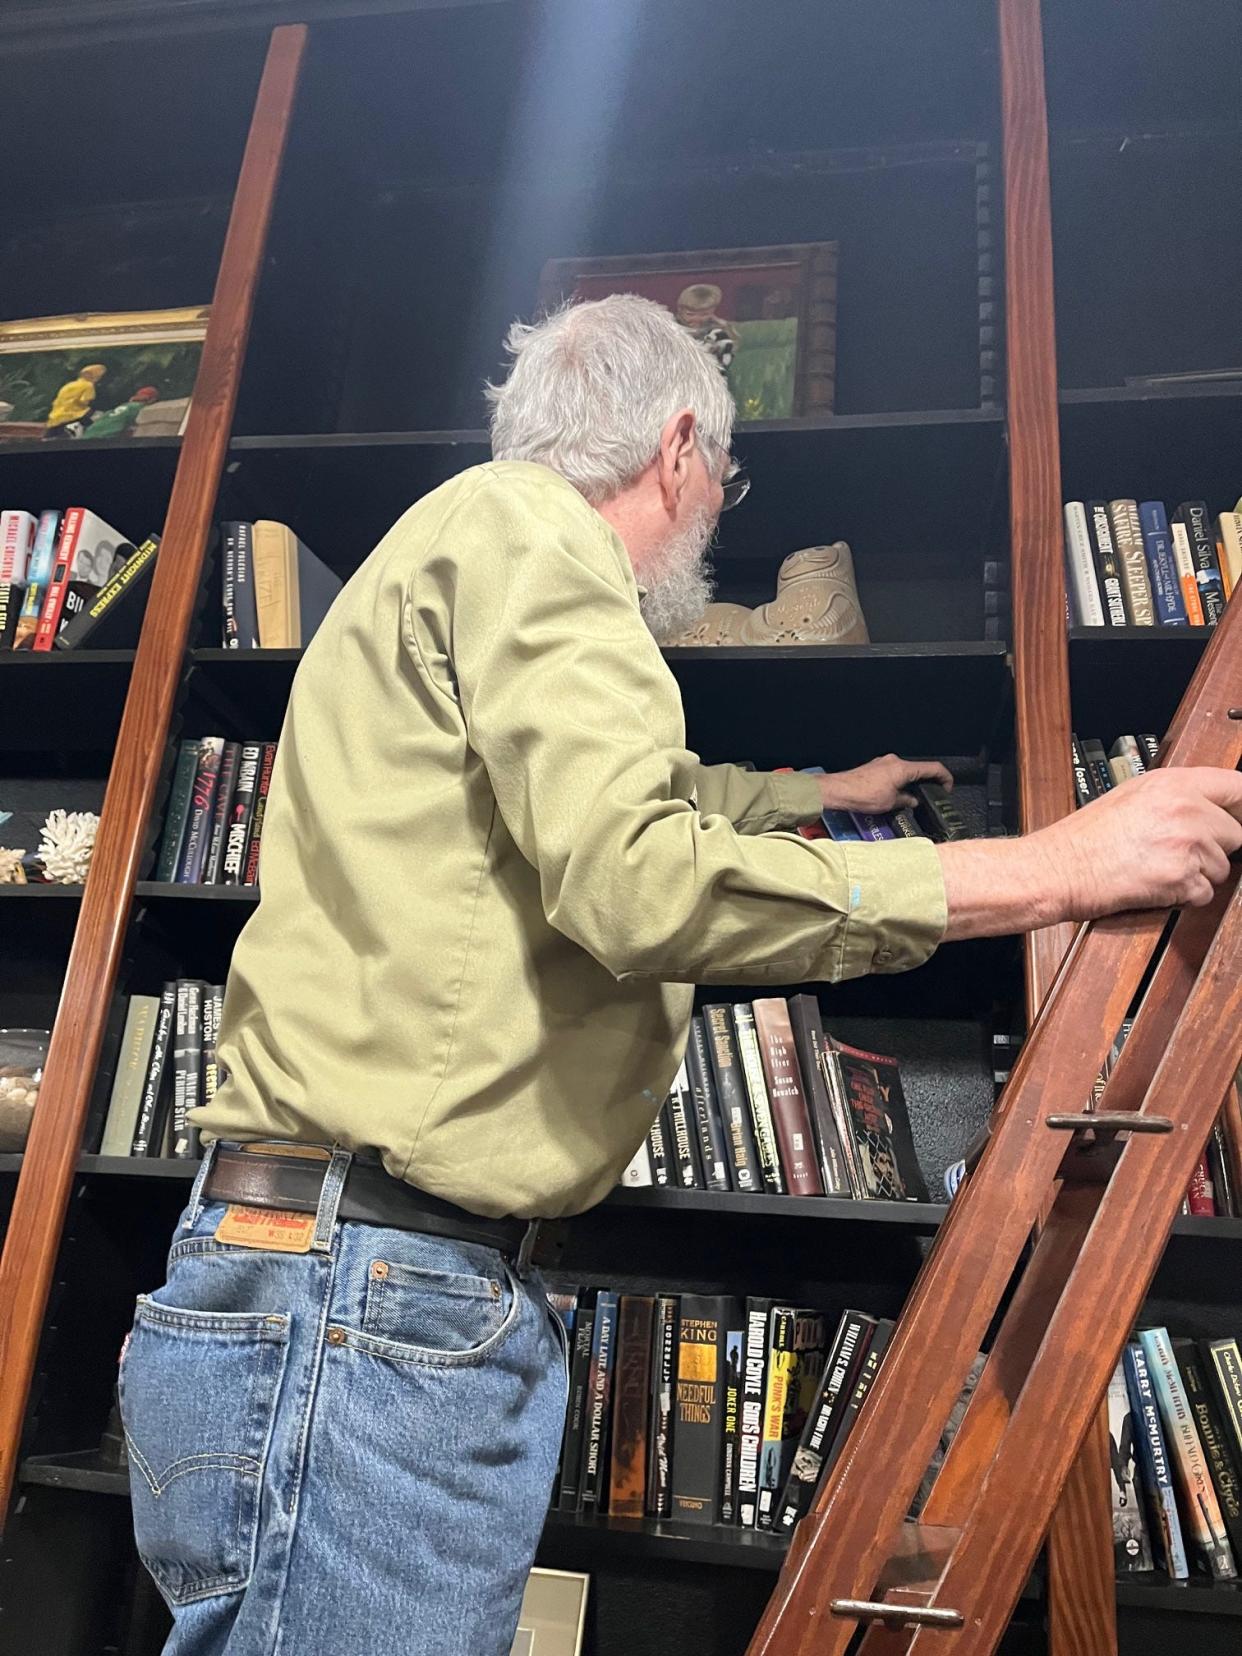 Mike Morford converted merchandise shelves into bookshelves in the former stationery business he turned into a home. He restored the ladder once used by clerks to fetch merchandi